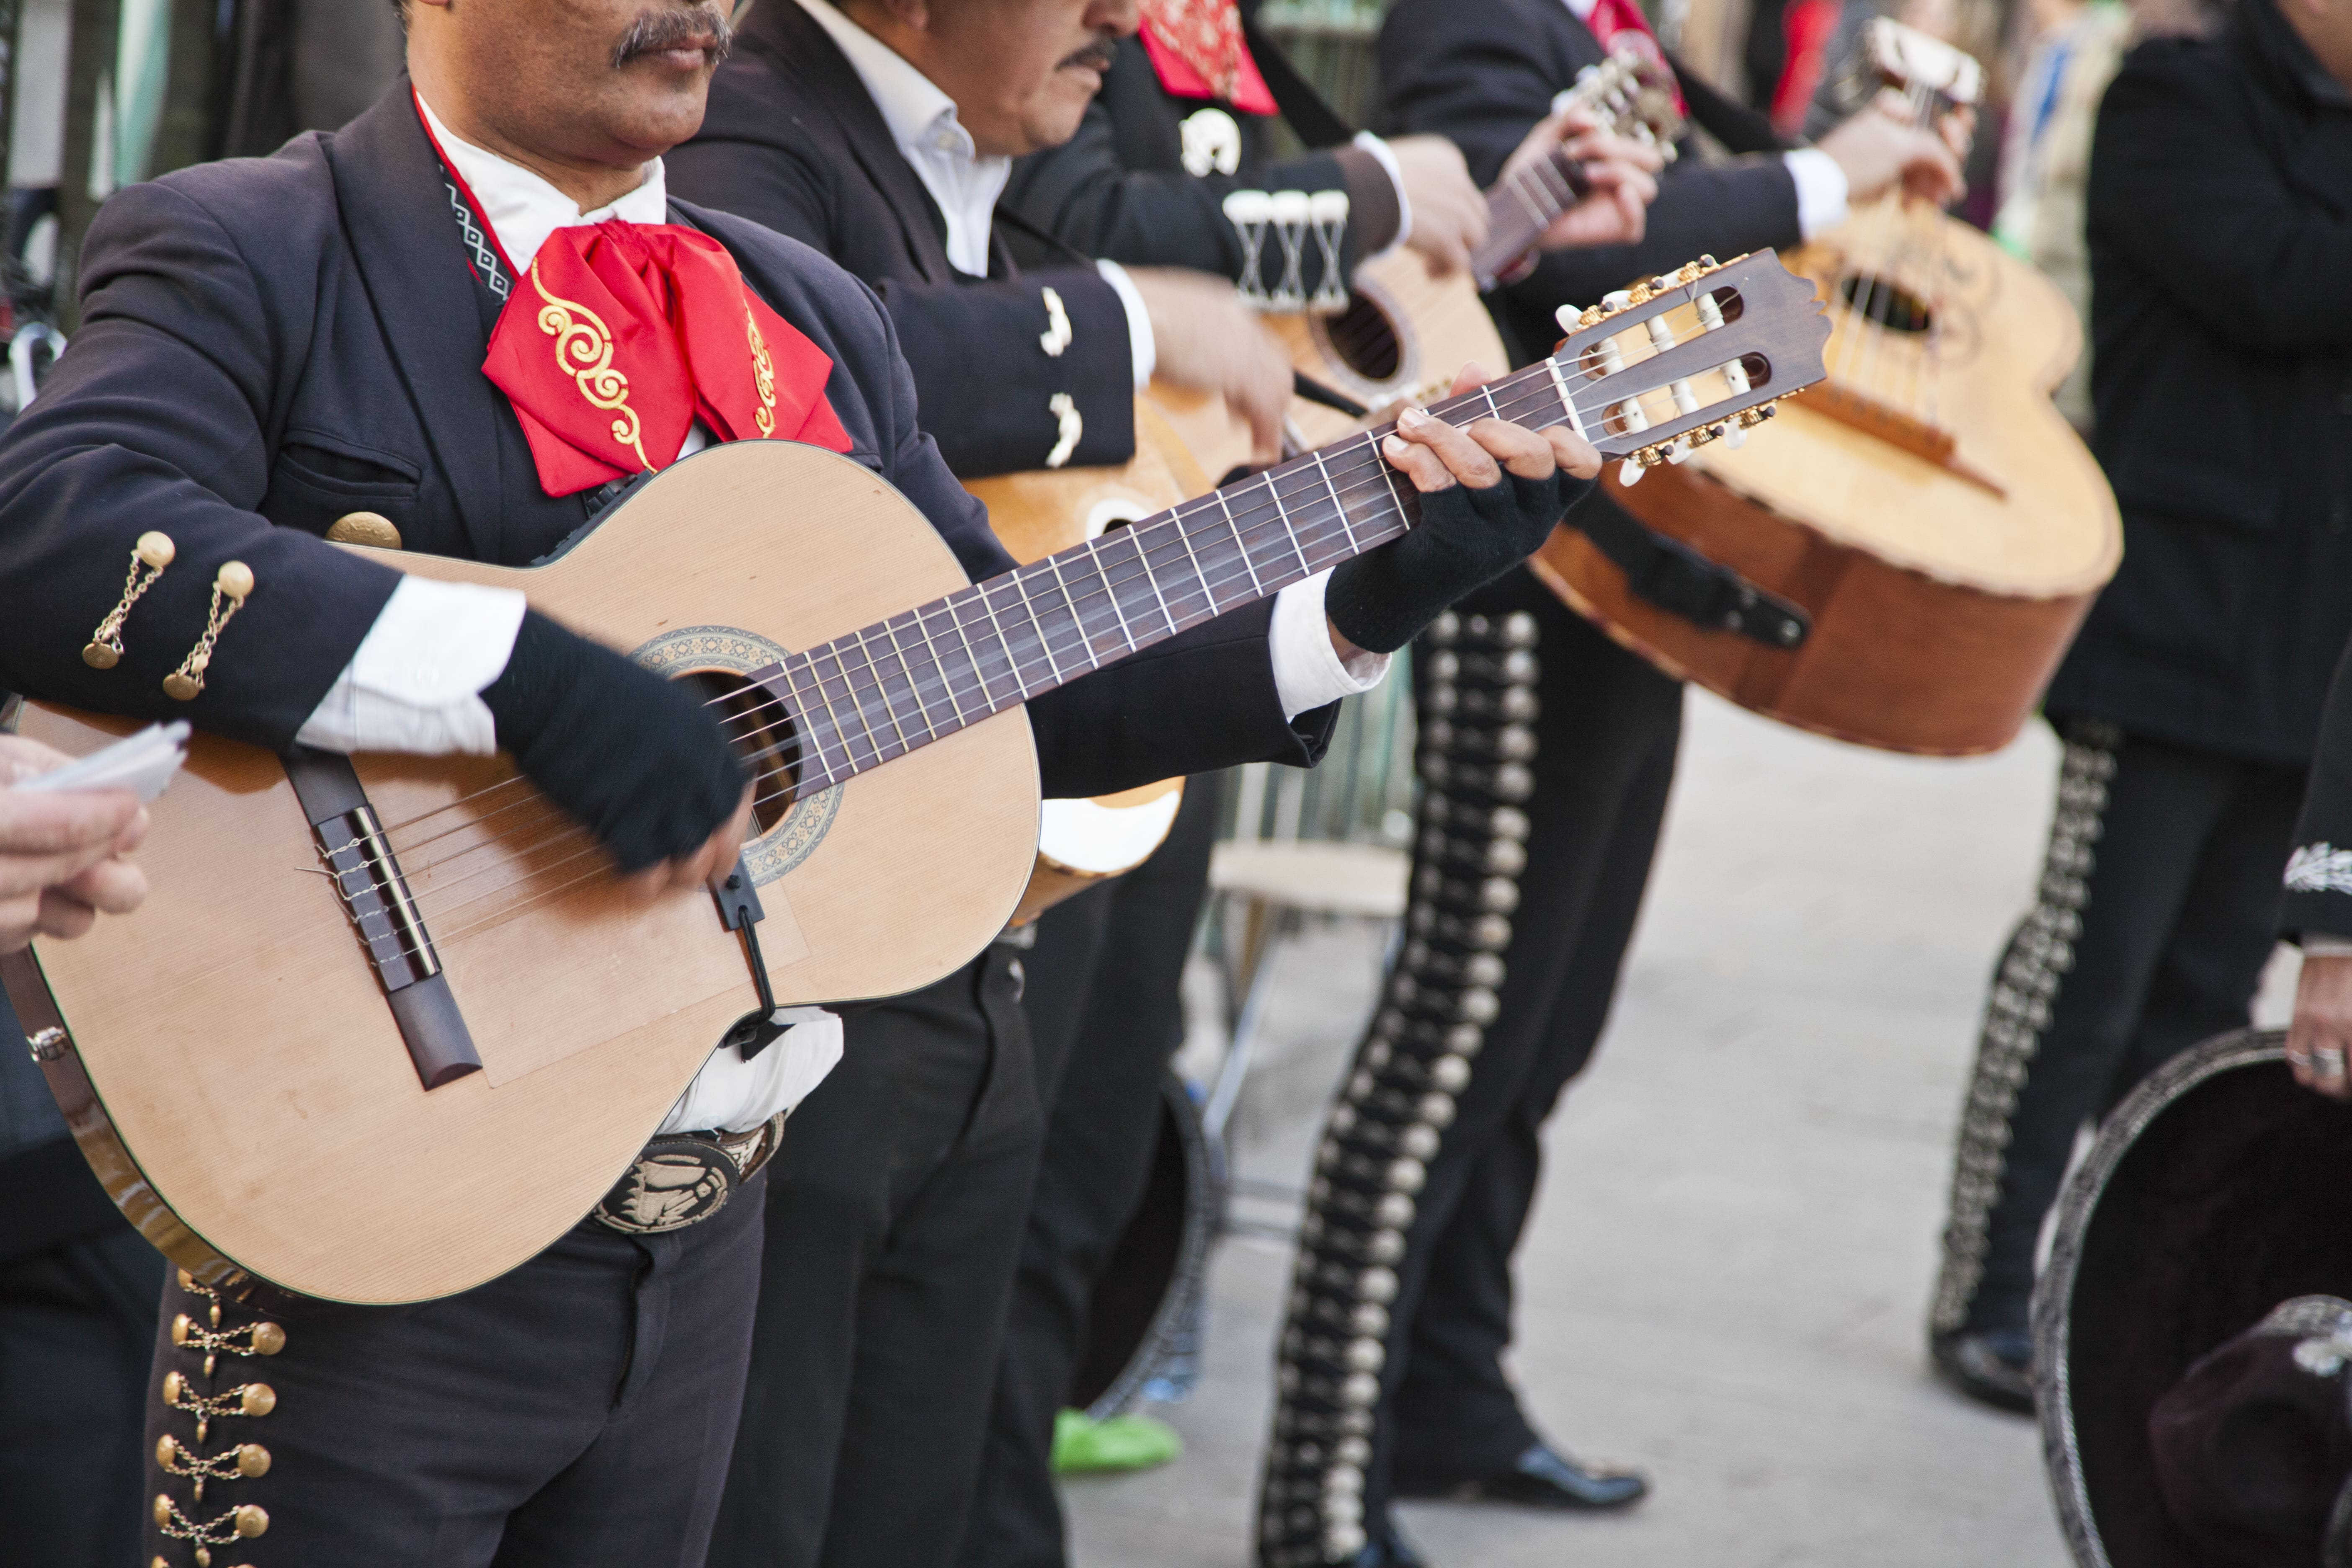  Group of typical Flamenco guitarists playing in the street wearing traditional suits.